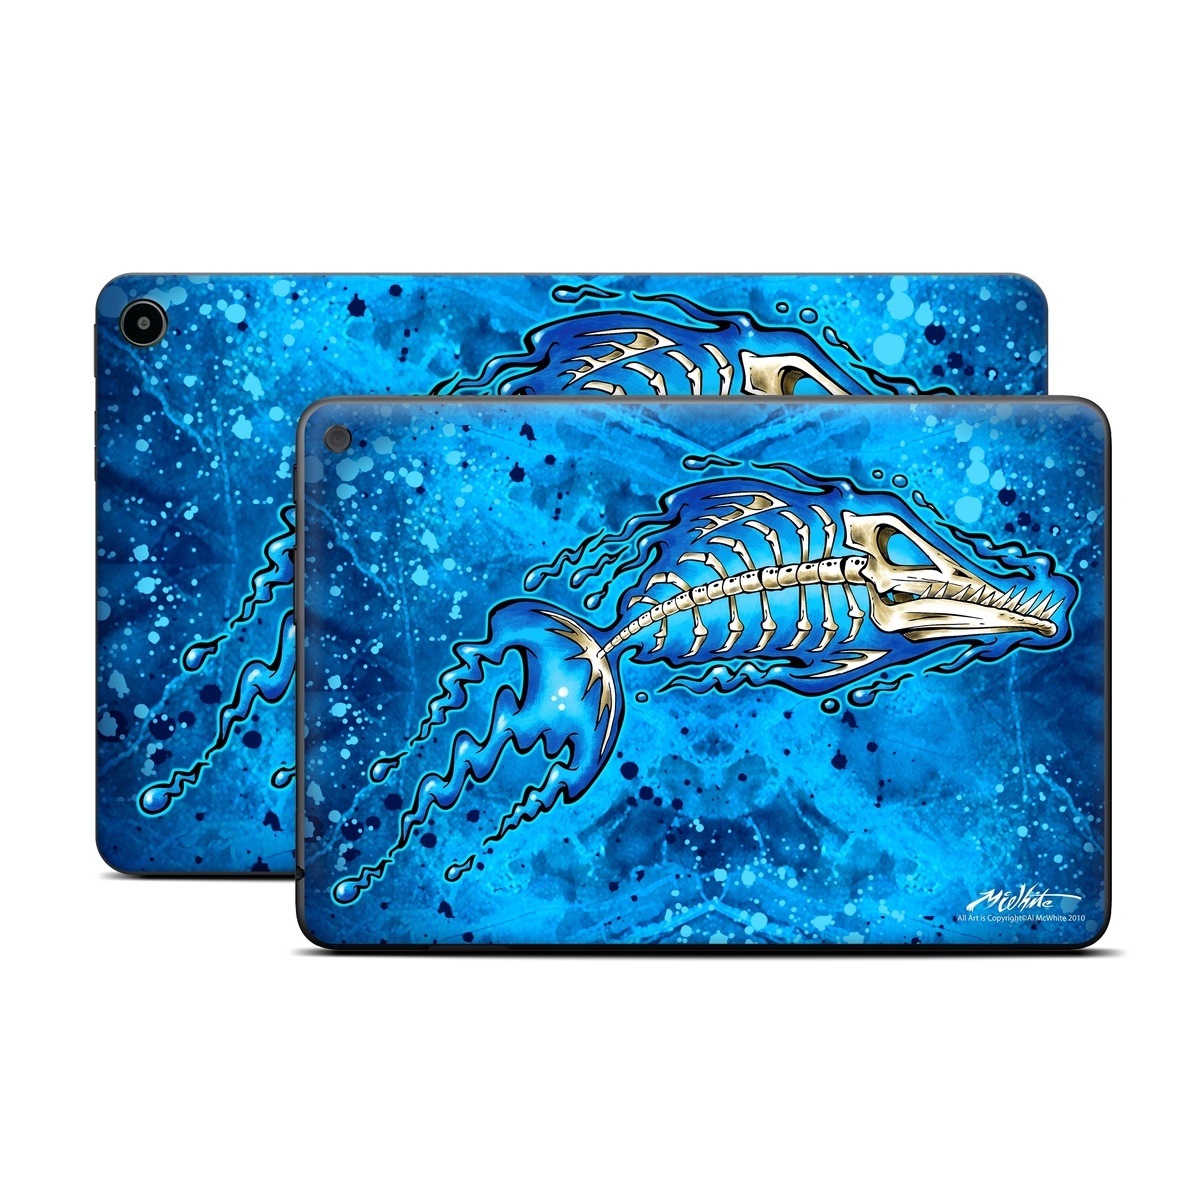 Amazon Fire Tablet Series Skin Skin design of Blue, Water, Aqua, Electric blue, Illustration, Graphic design, Liquid, Graphics, Marine biology, Art, with blue, white colors